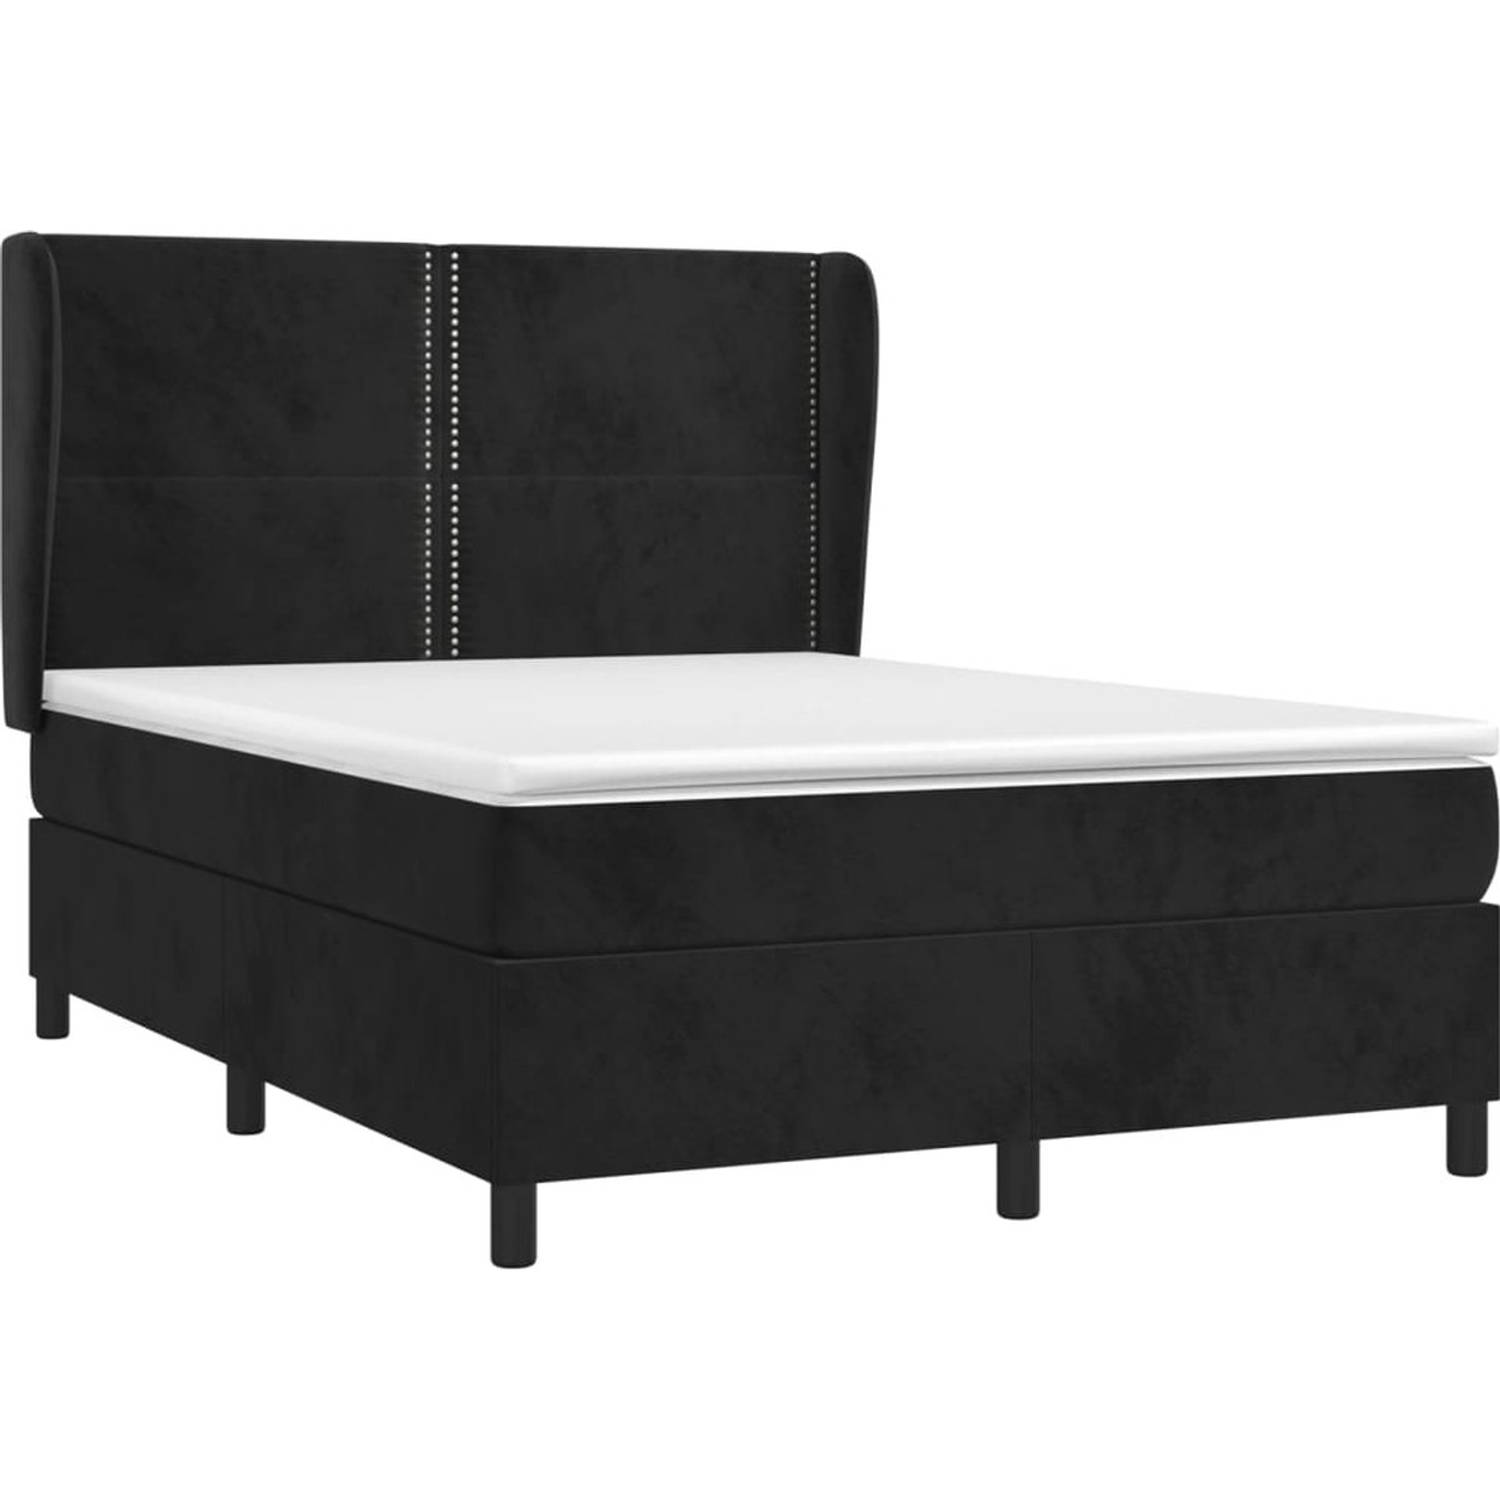 The Living Store Boxspringbed - Bed - 193 x 147 x 118/128 cm - Zacht fluweel